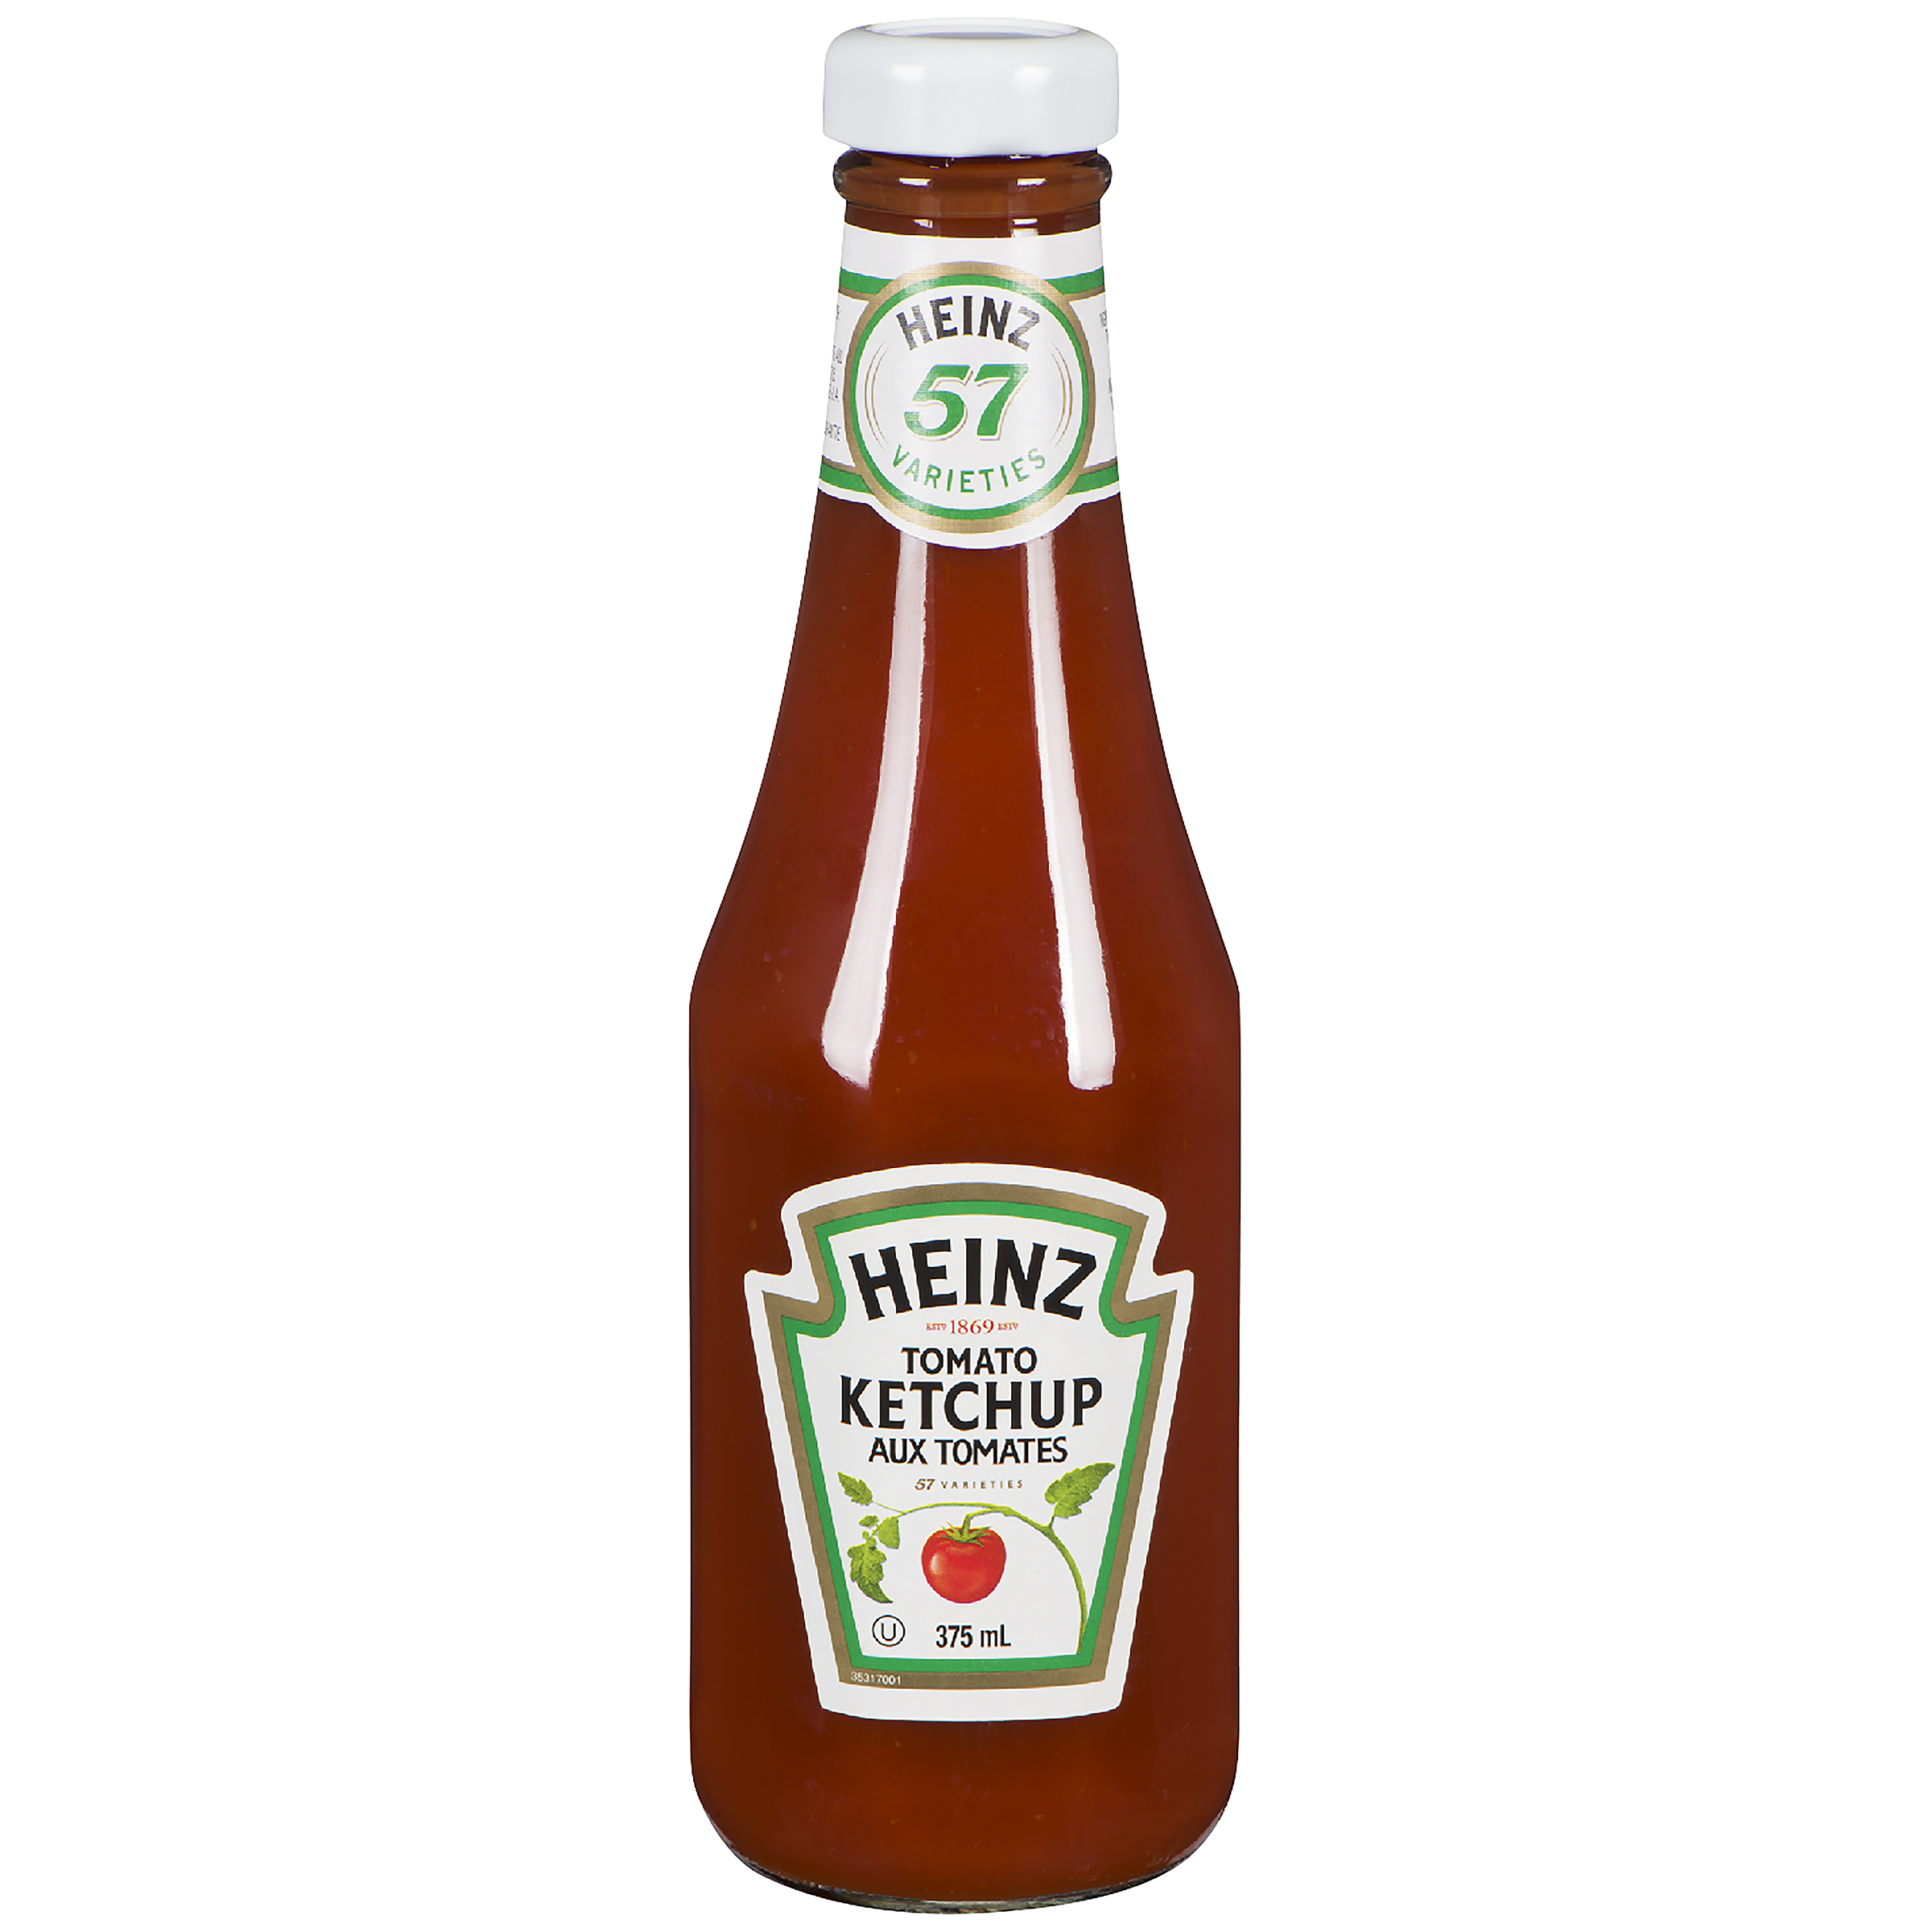 Tomato Ketchup Glass Bottle - Products - Heinz®